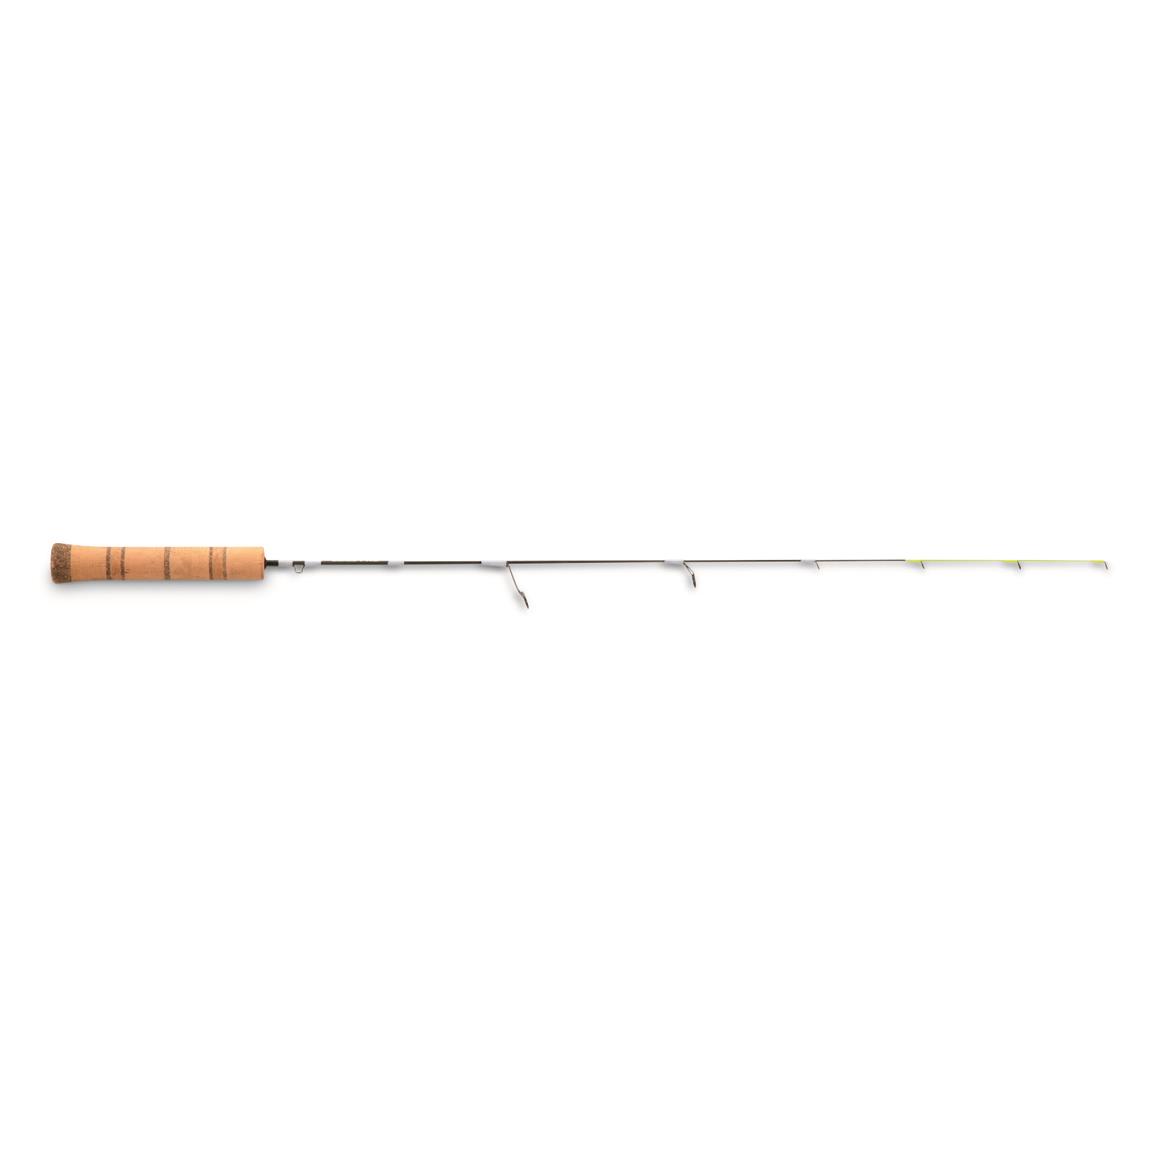 13 Fishing Tickle Stick Ice Fishing Rod, 27 Length, Mag Light - 728921, Ice  Fishing Rods at Sportsman's Guide